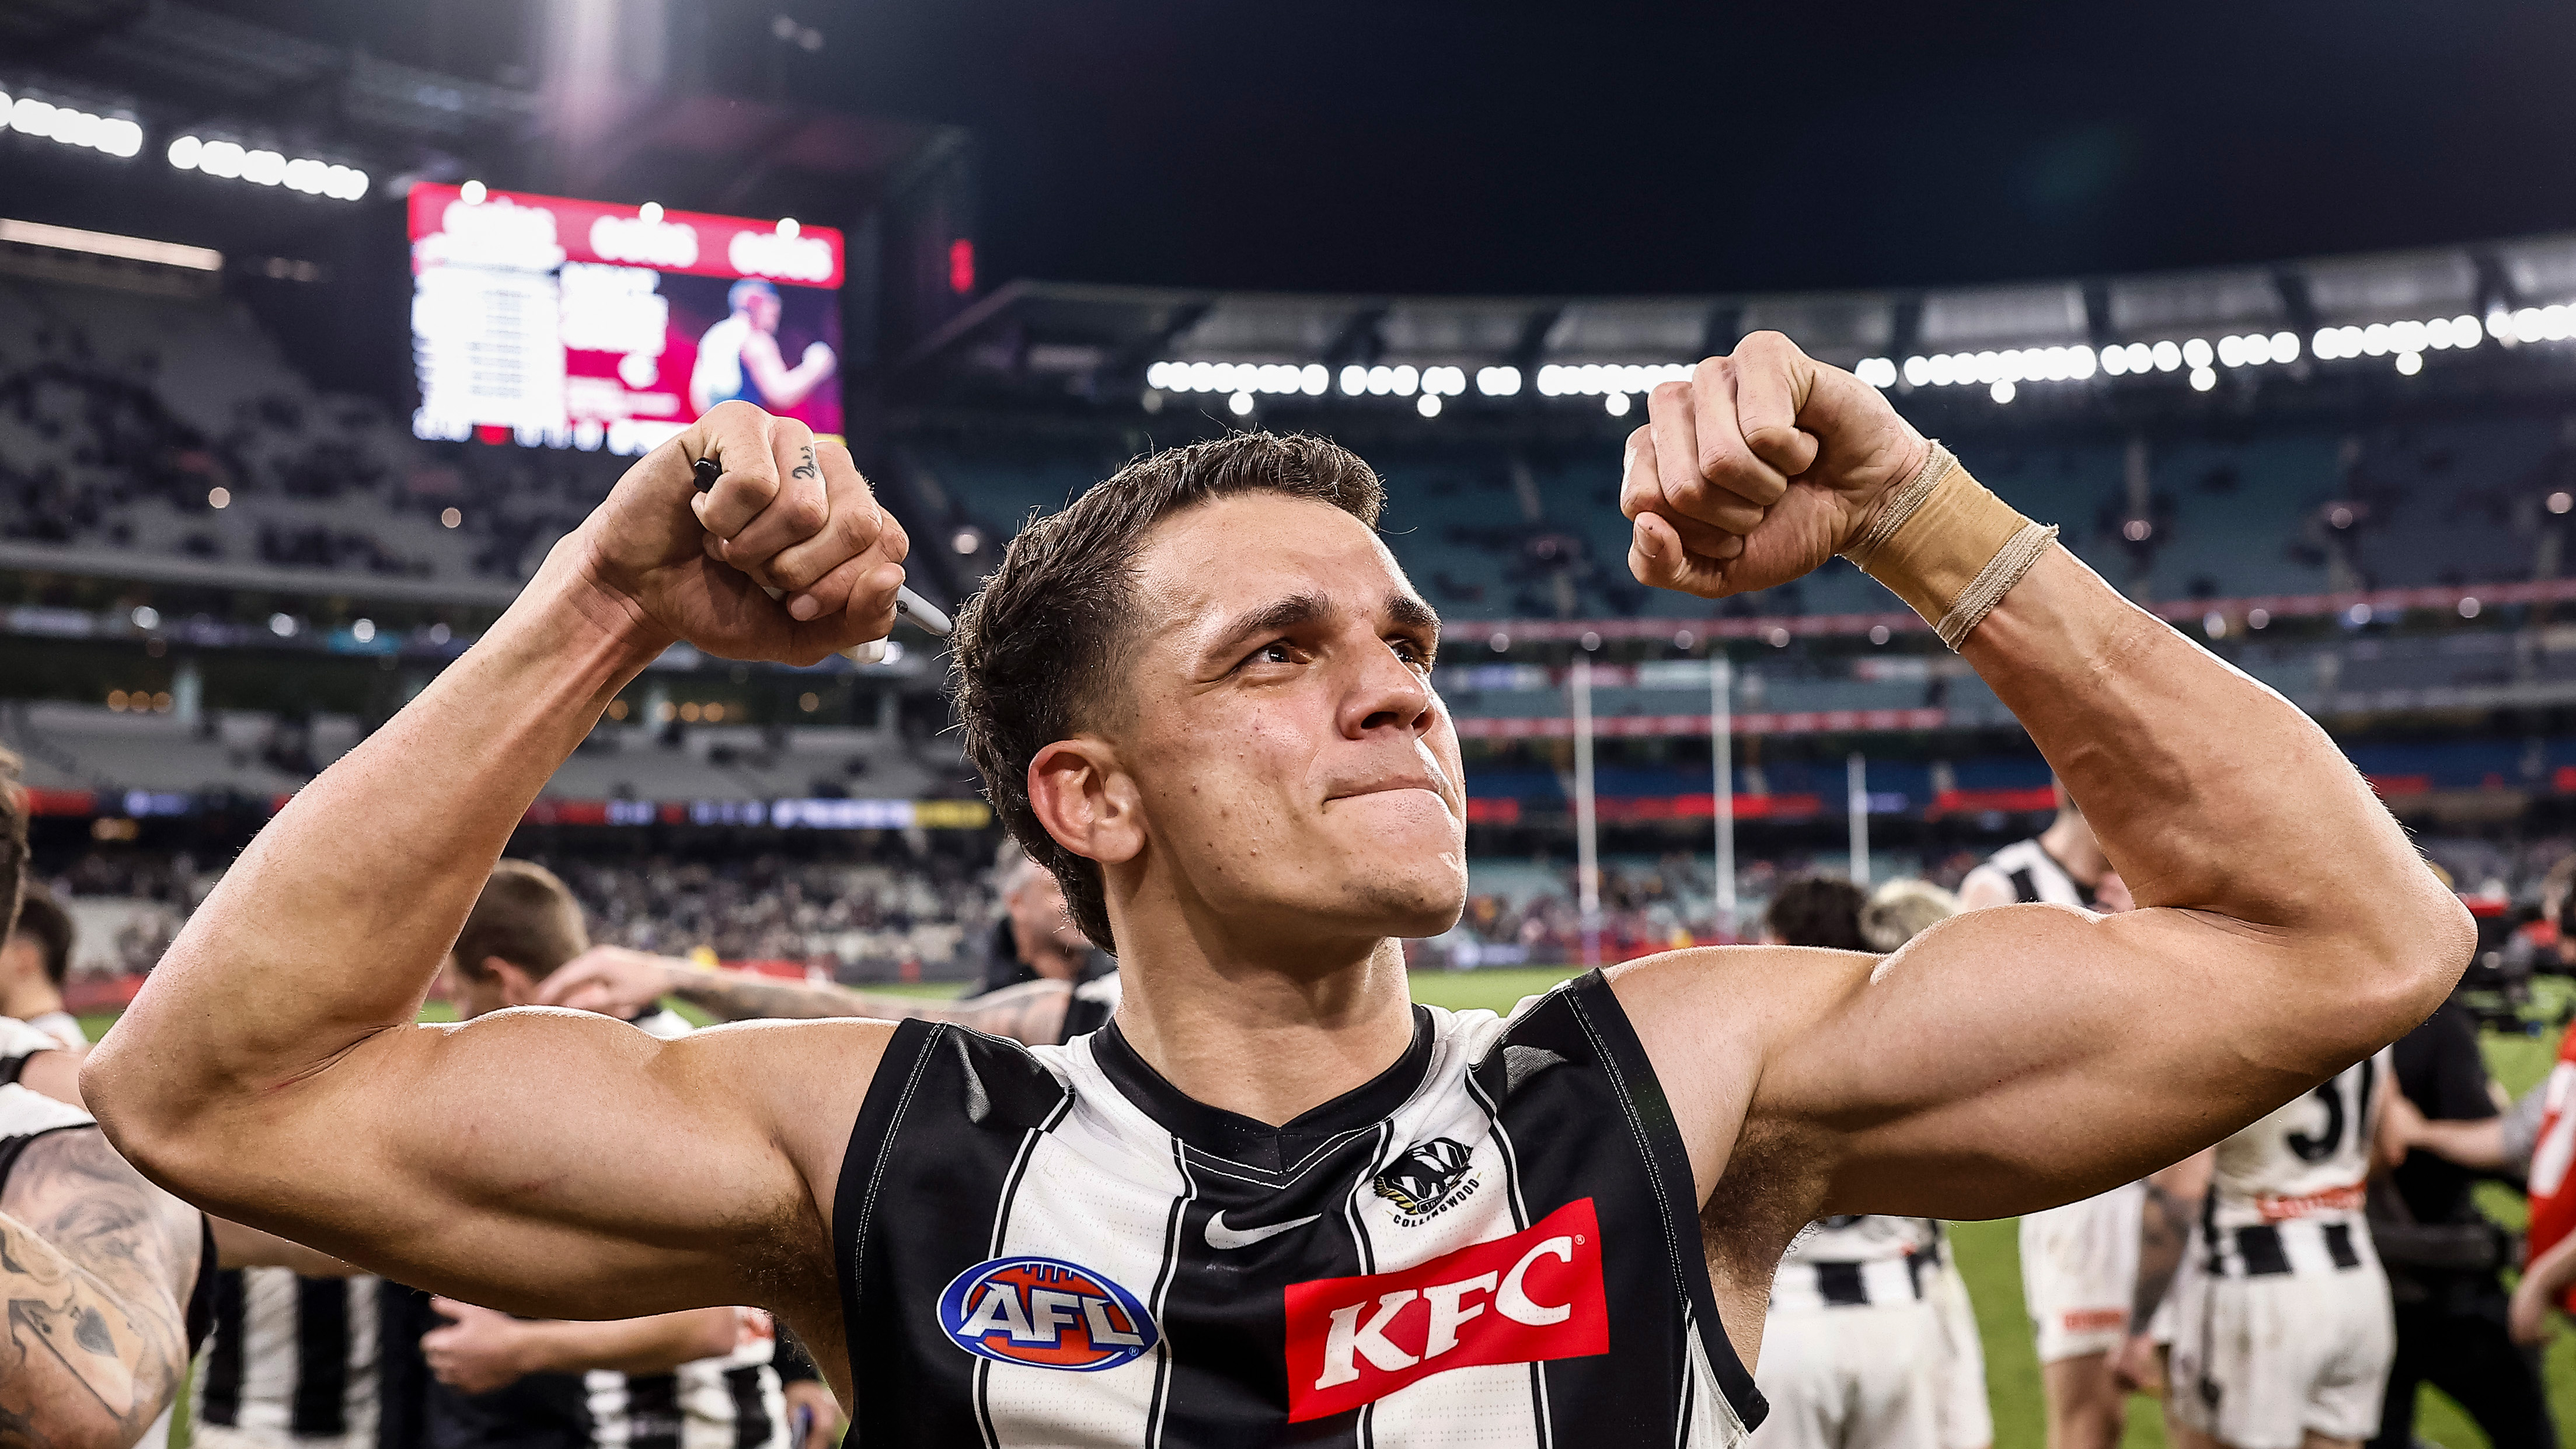 Ash Johnson of the Magpies acknowledges the fans after the round 21 AFL match between the Melbourne Demons and the Collingwood Magpies at Melbourne Cricket Ground on August 05, 2022 in Melbourne, Australia. (Photo by Darrian Traynor/Getty Images)